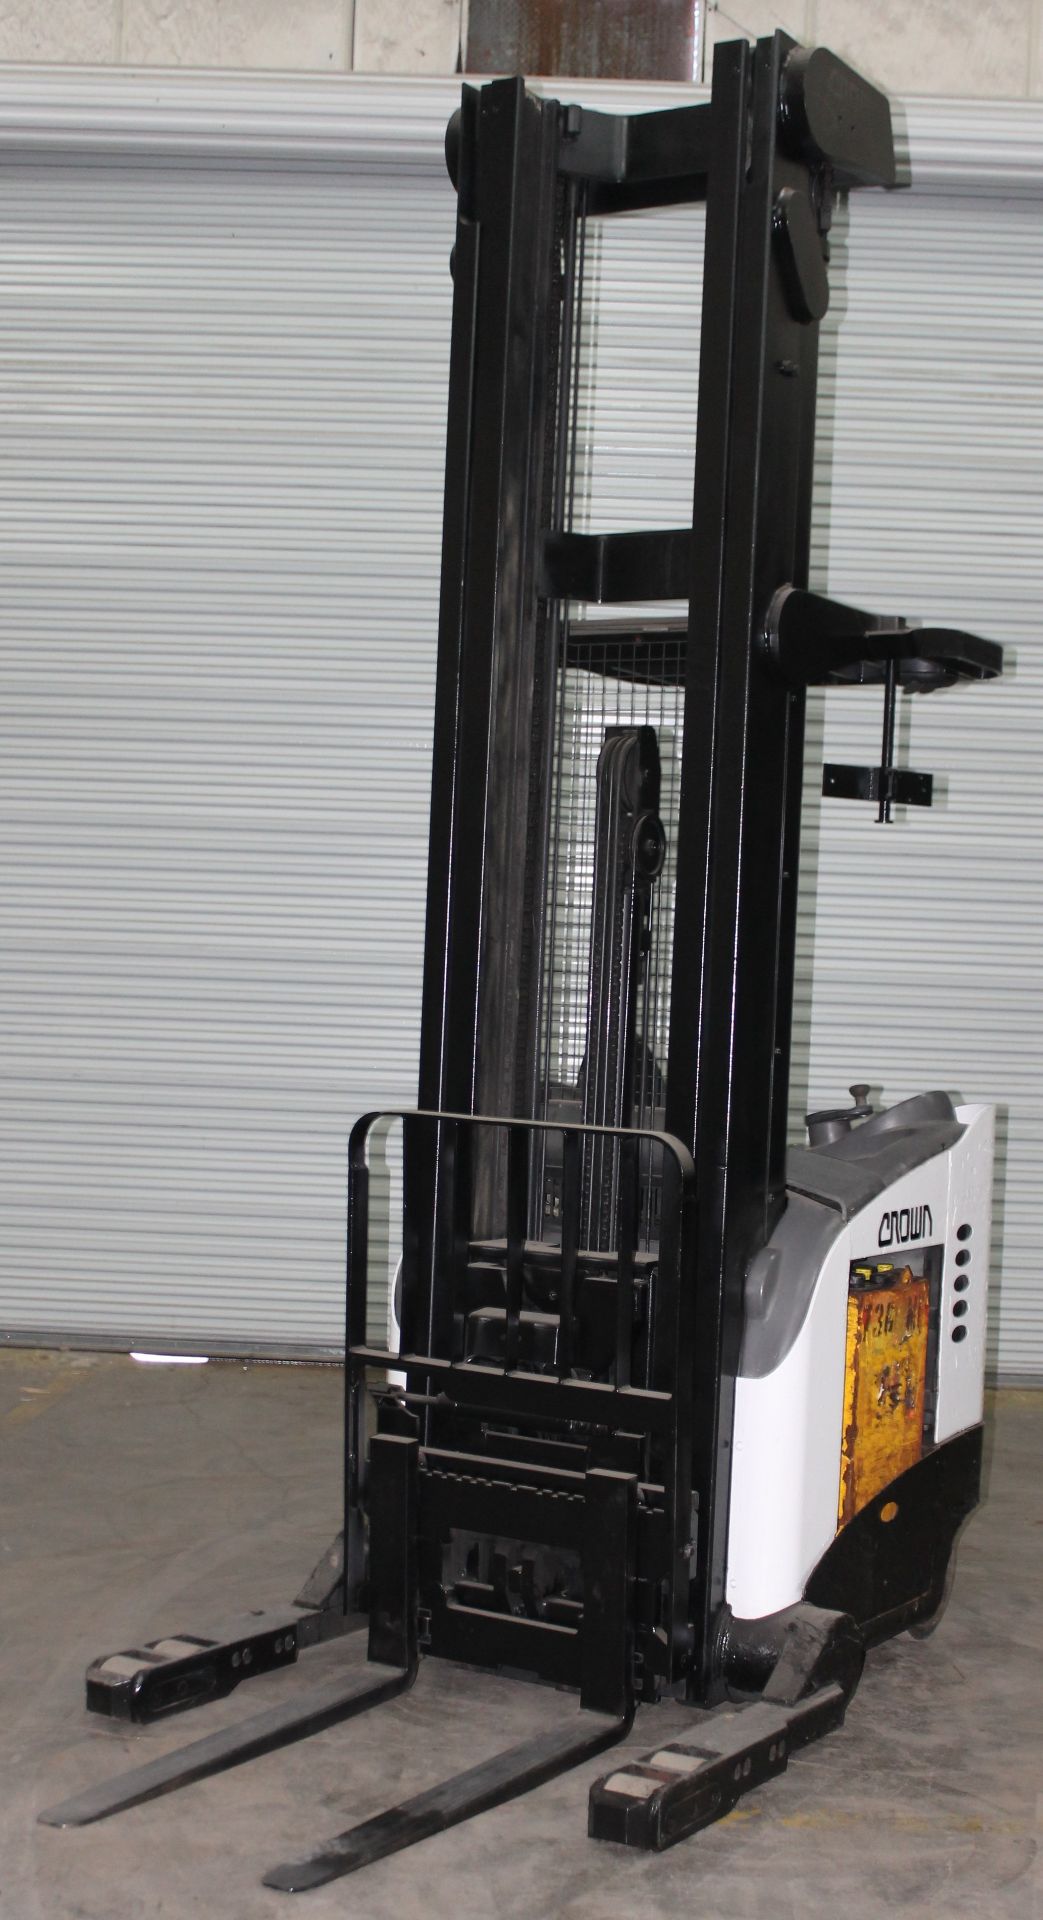 2002 CROWN RR5200 SERIES REACH IN TRUCK/FORKLIFT - Image 9 of 9